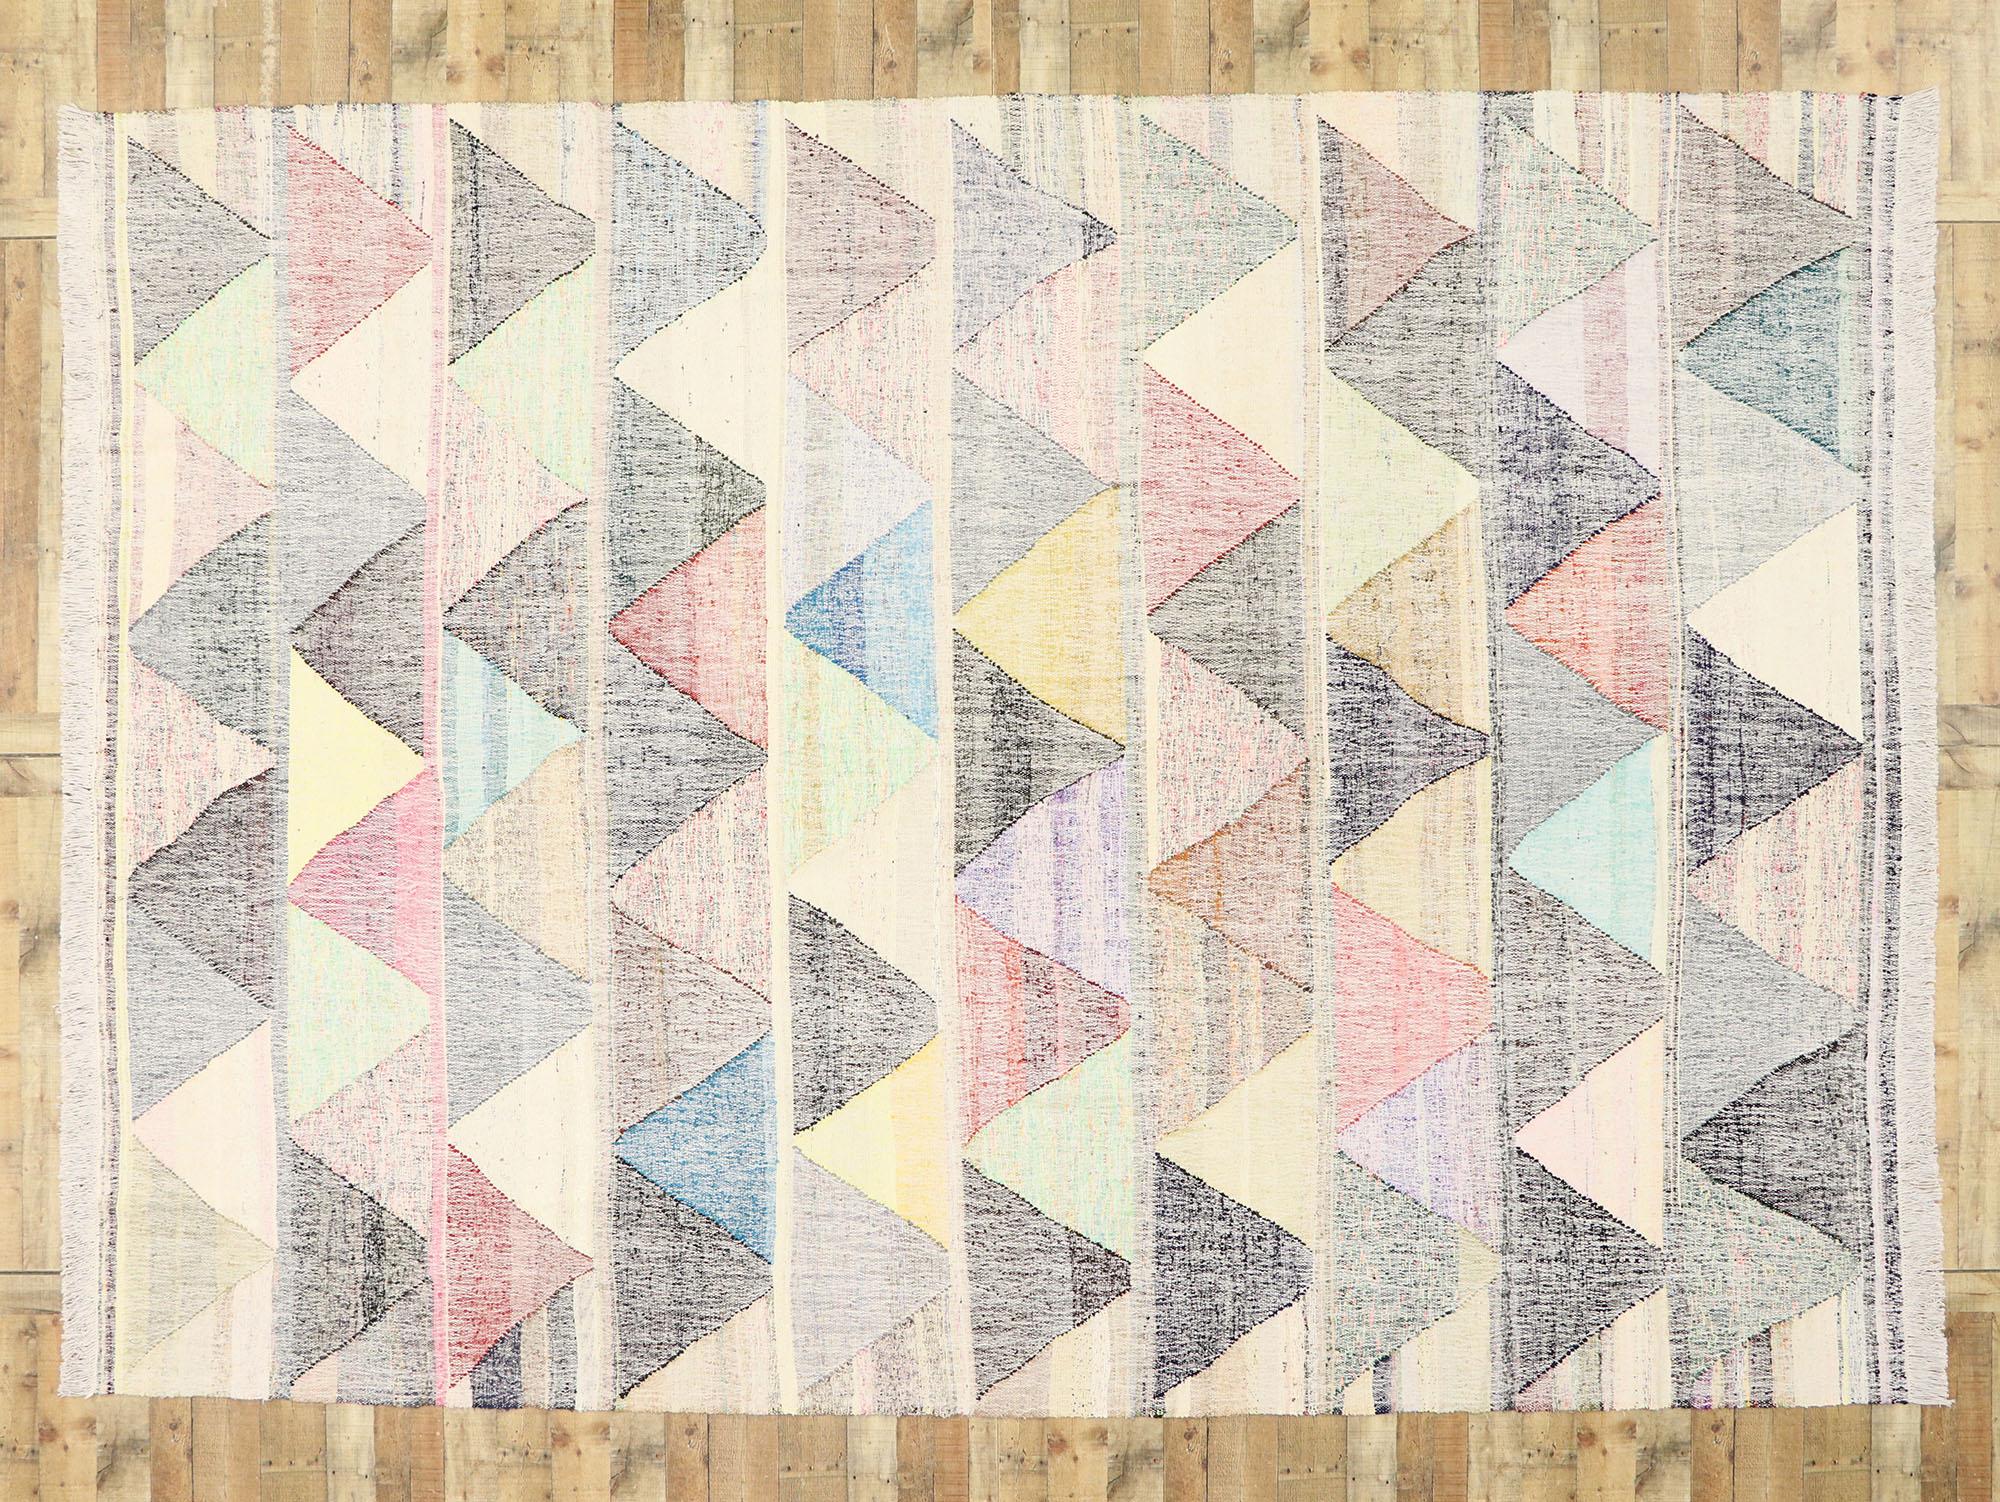 New Handwoven Turkish Kilim Rug with Triangle Pattern 2